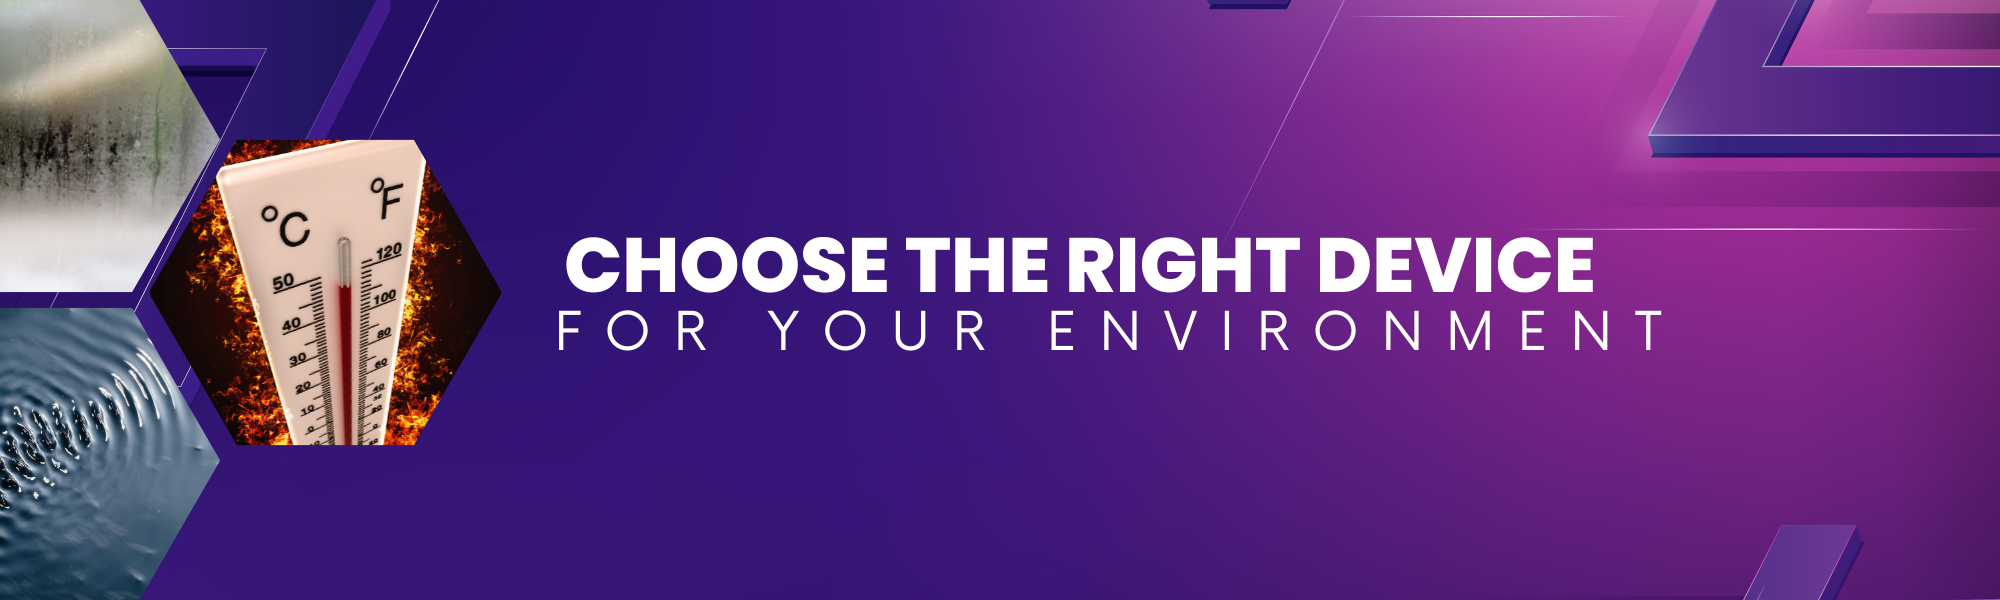 Yentek Europe GmbH | Environmental Conditions: Choose the right device